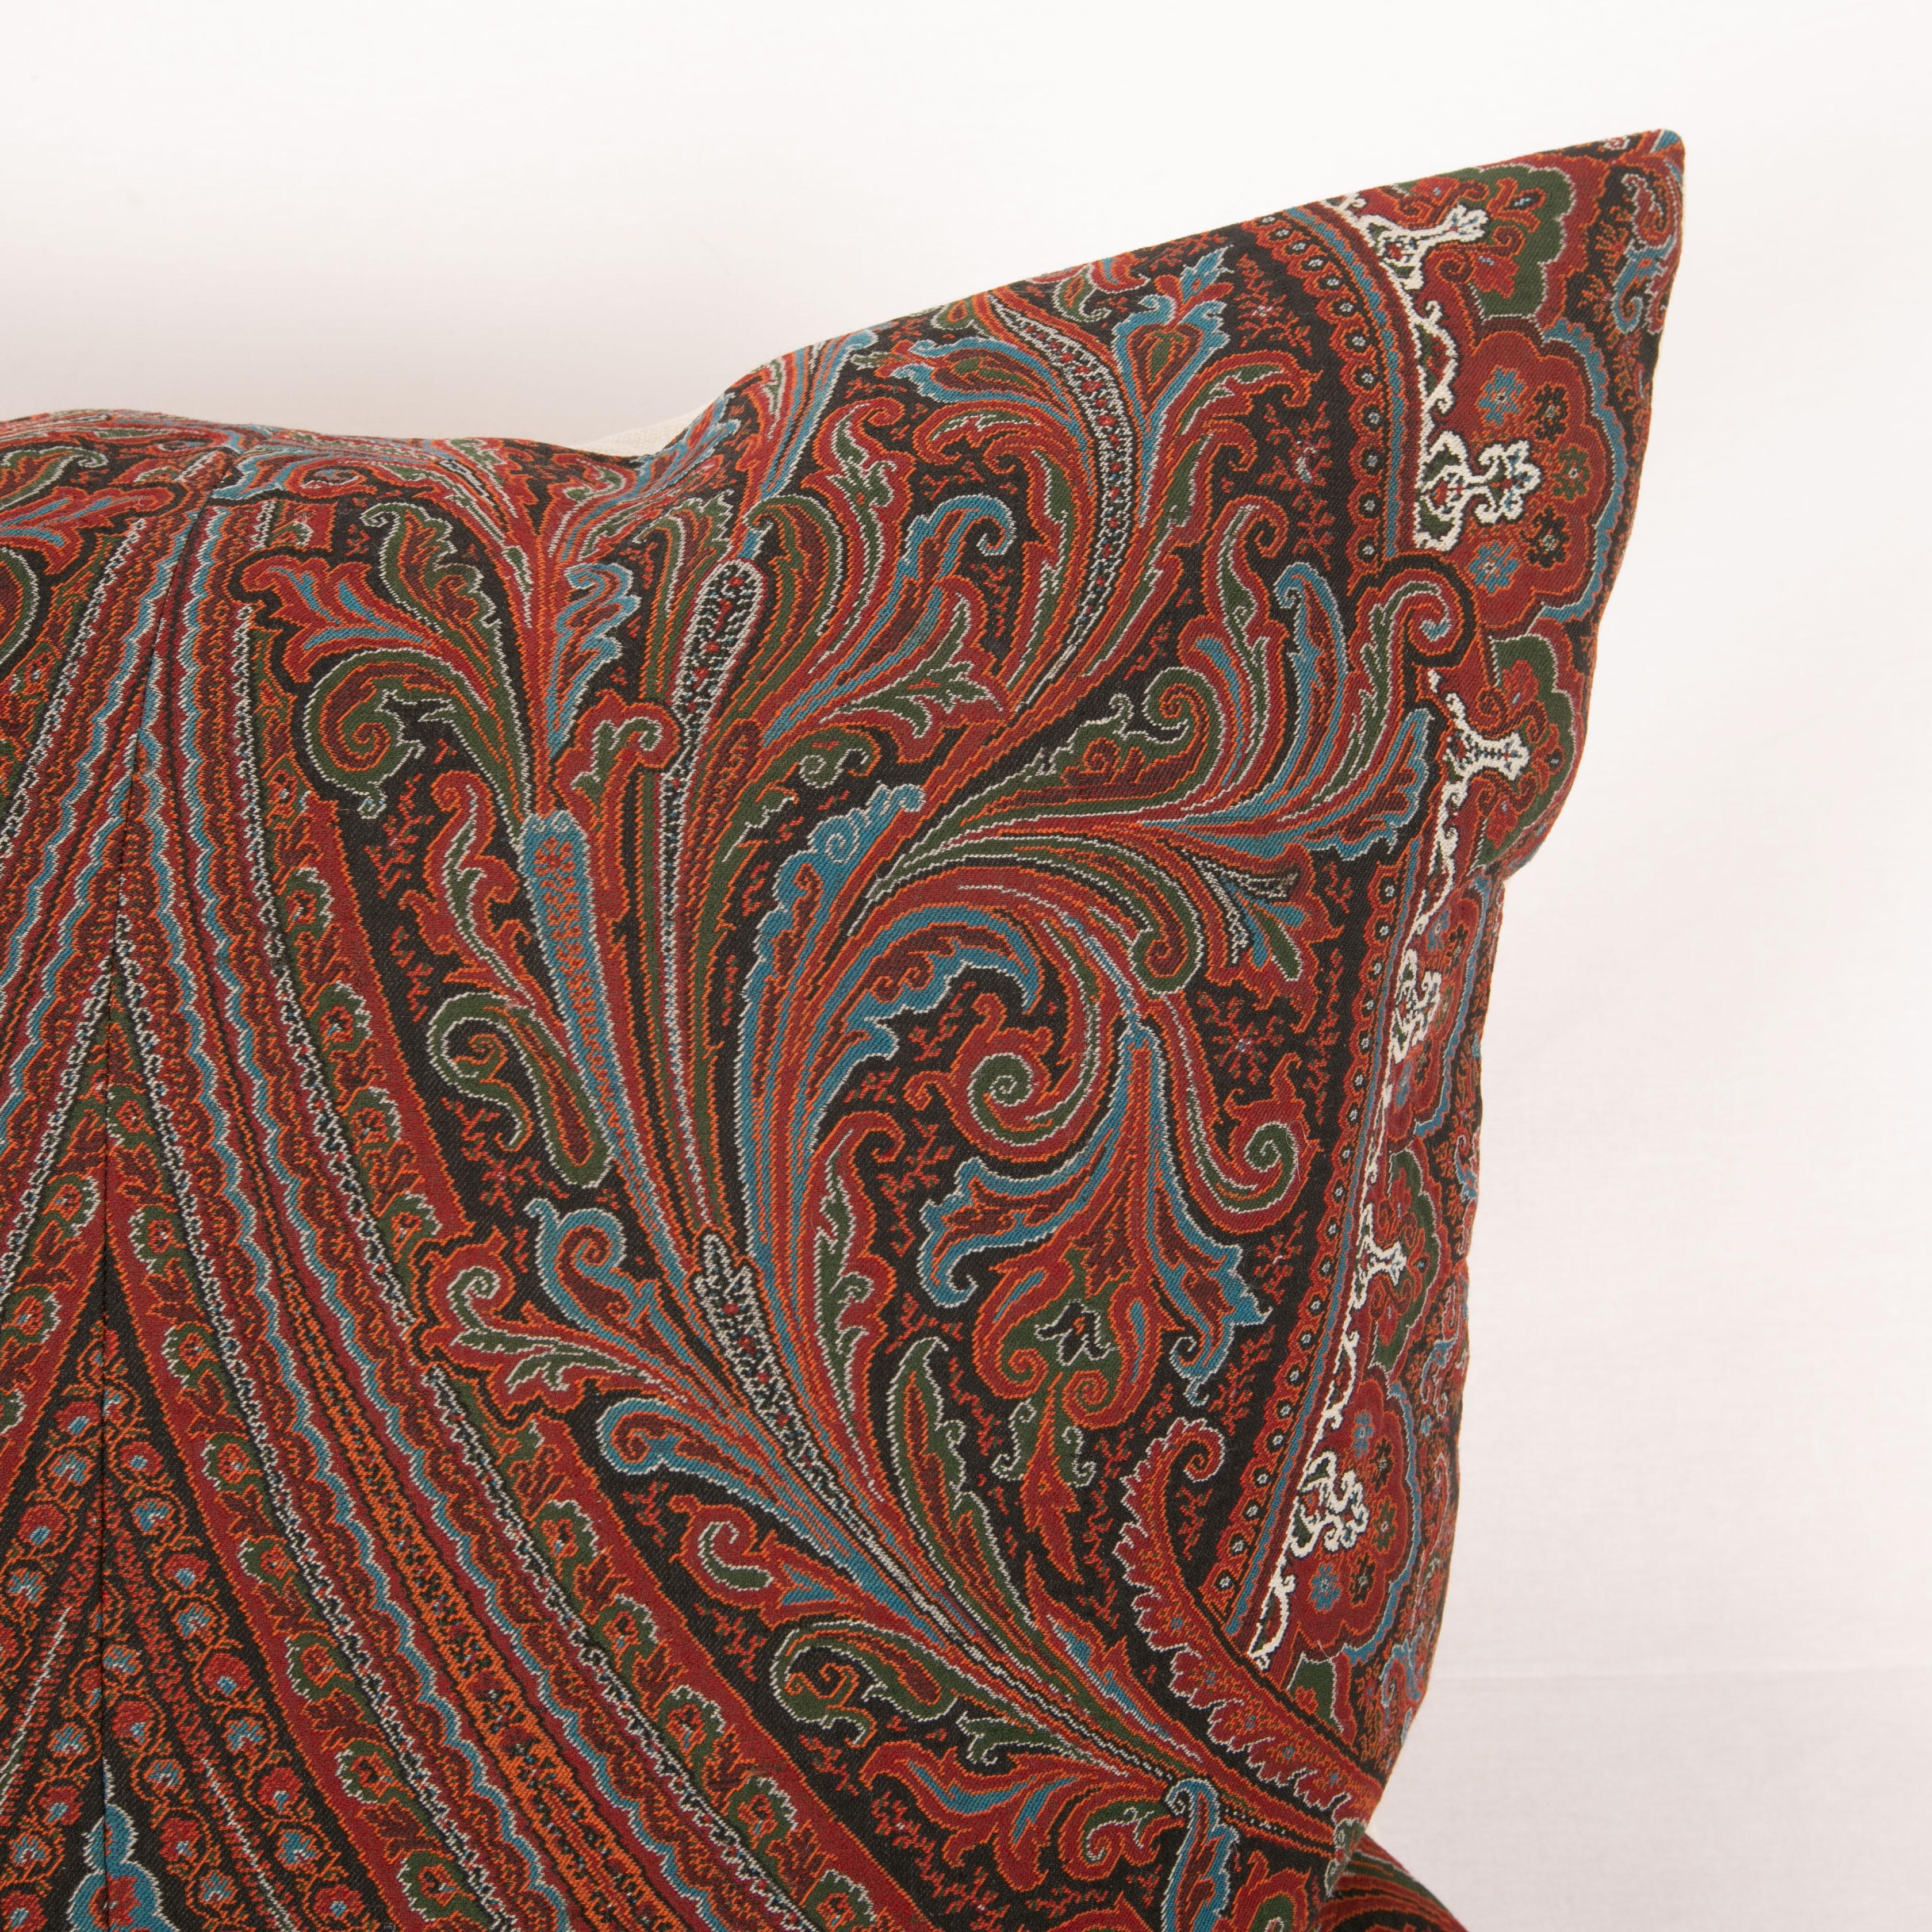 Woven Antique Paisley Shawl Pillow, 19th C.